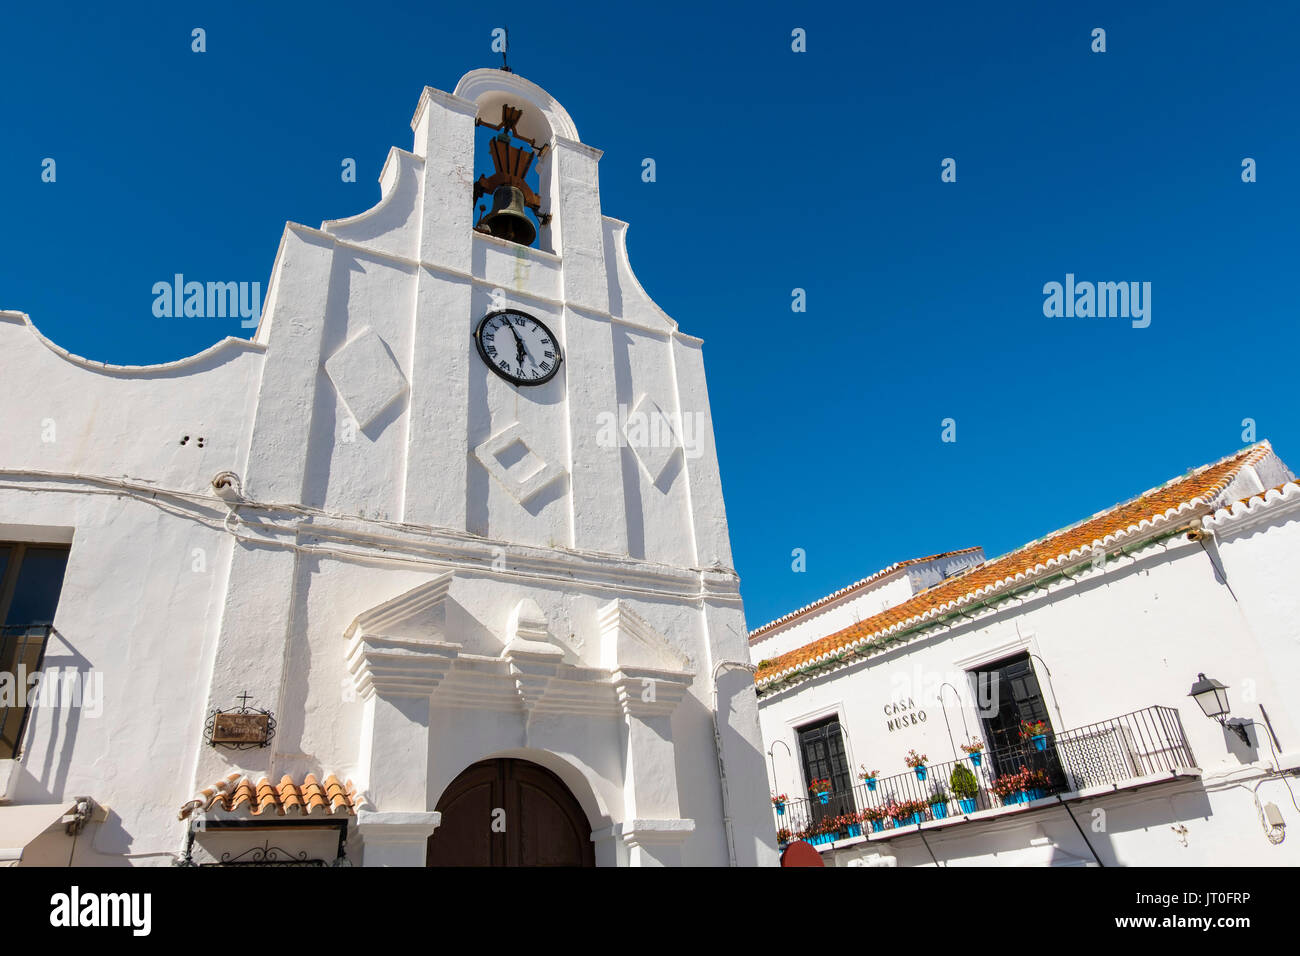 Church of San Sabastian, typical white village of Mijas. Costa del Sol, Málaga province. Andalusia, Southern Spain Europe Stock Photo